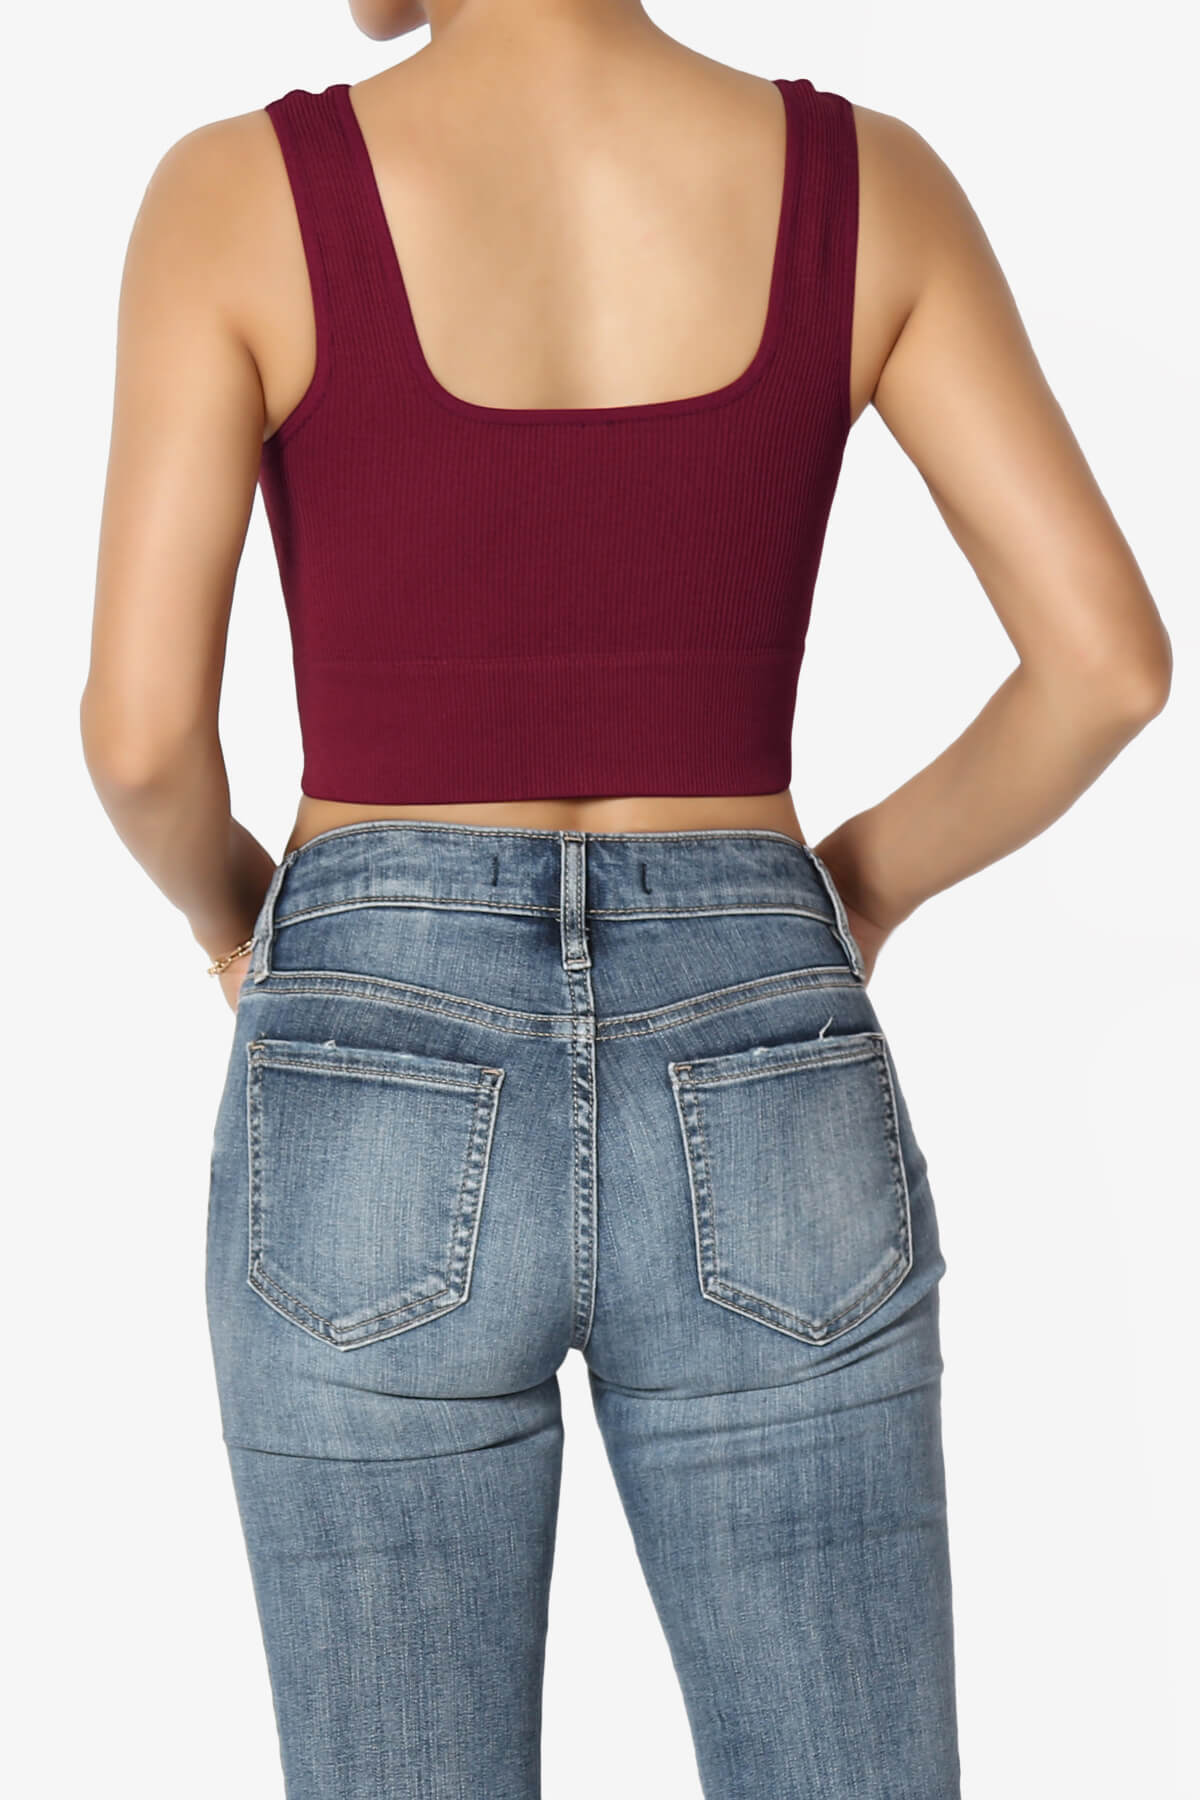 Hilde Ripped Seamless Square Neck Crop Tank Top BURGUNDY_2